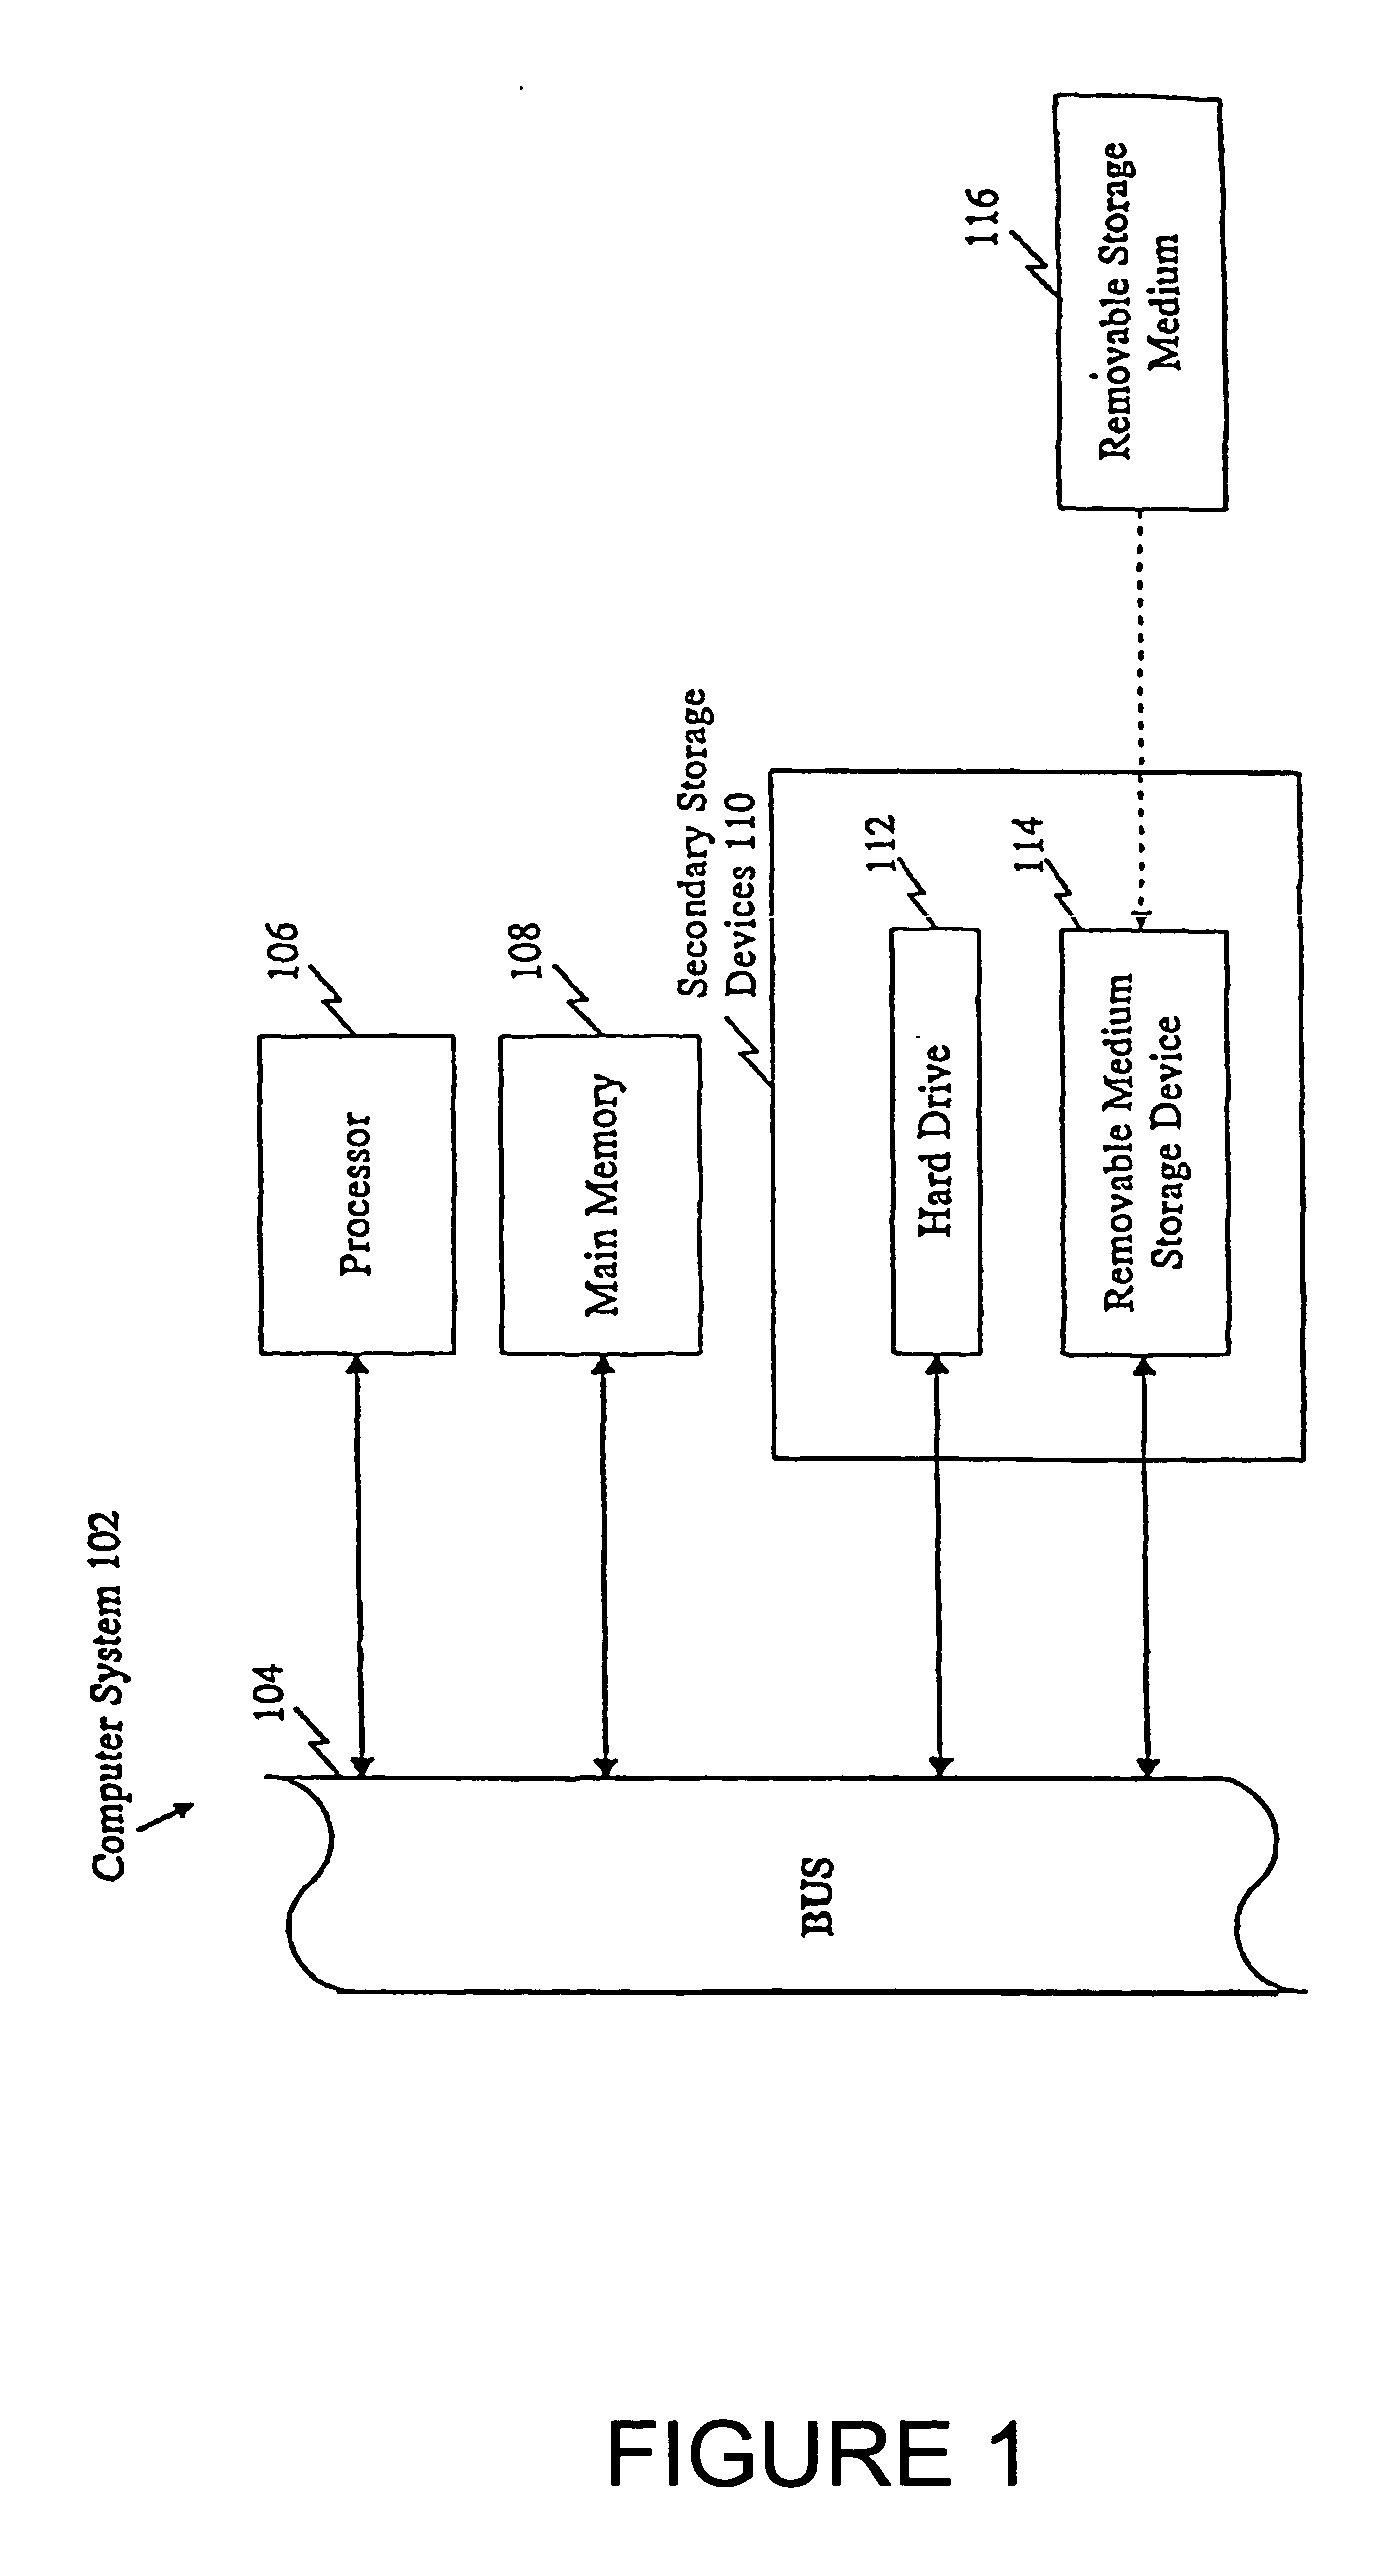 Polymorphisms in known genes associated with human disease, methods of detection and uses thereof